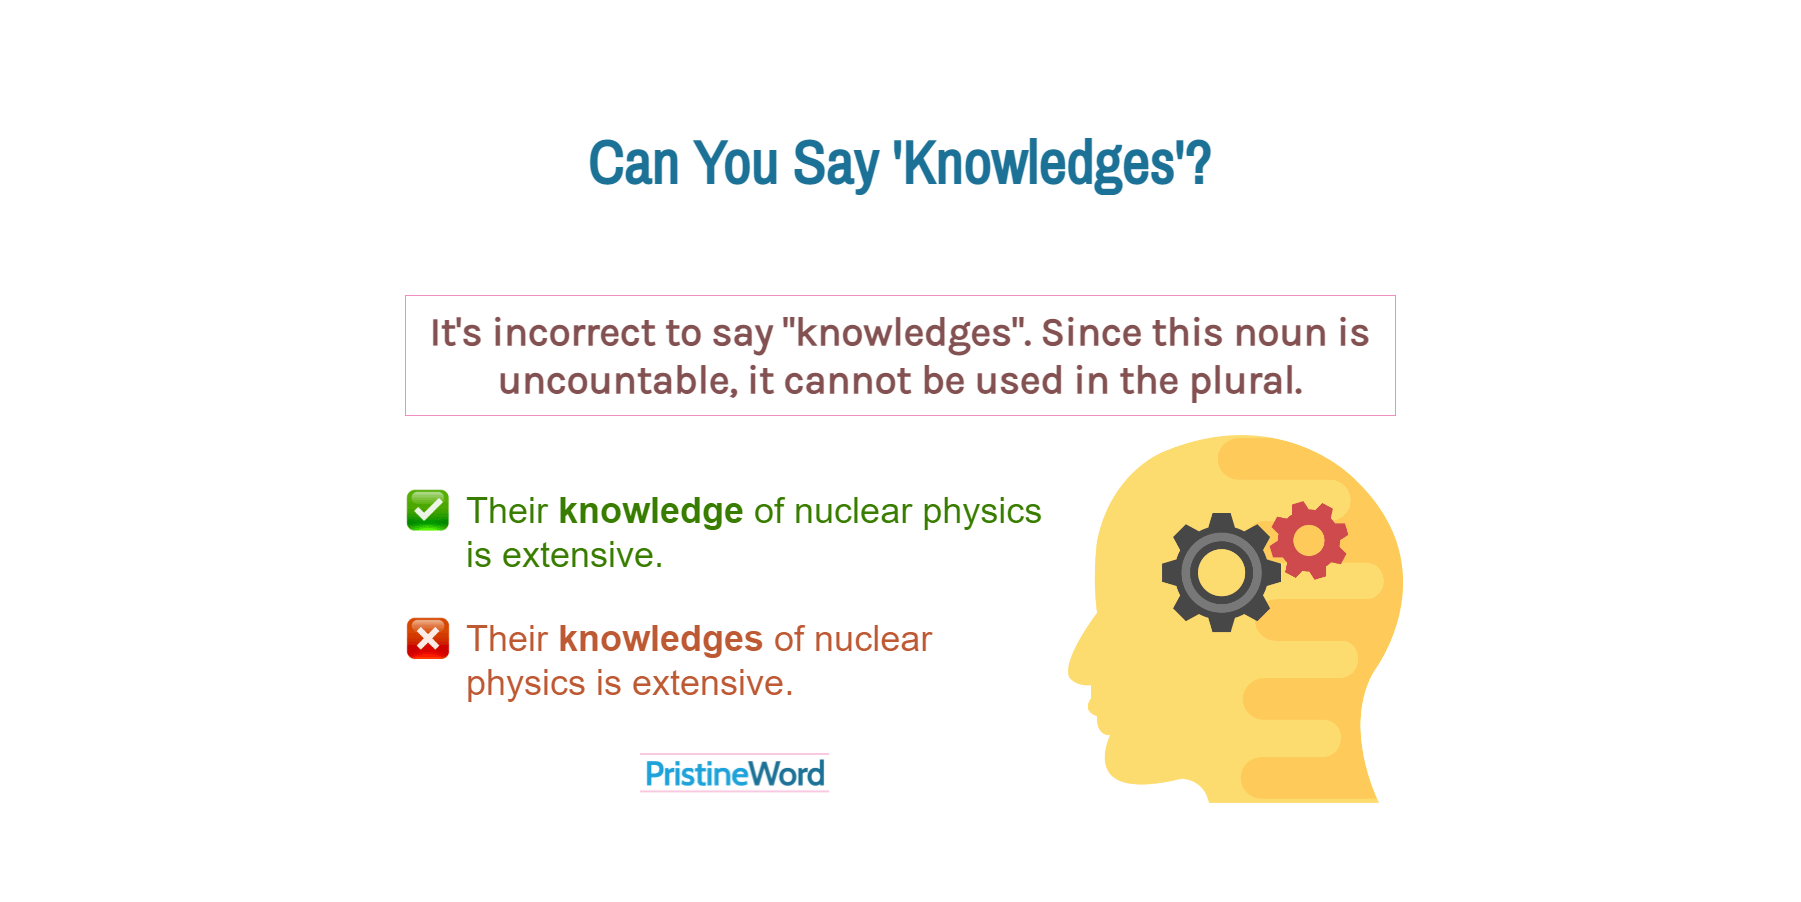 Can You Say 'Knowledges'?